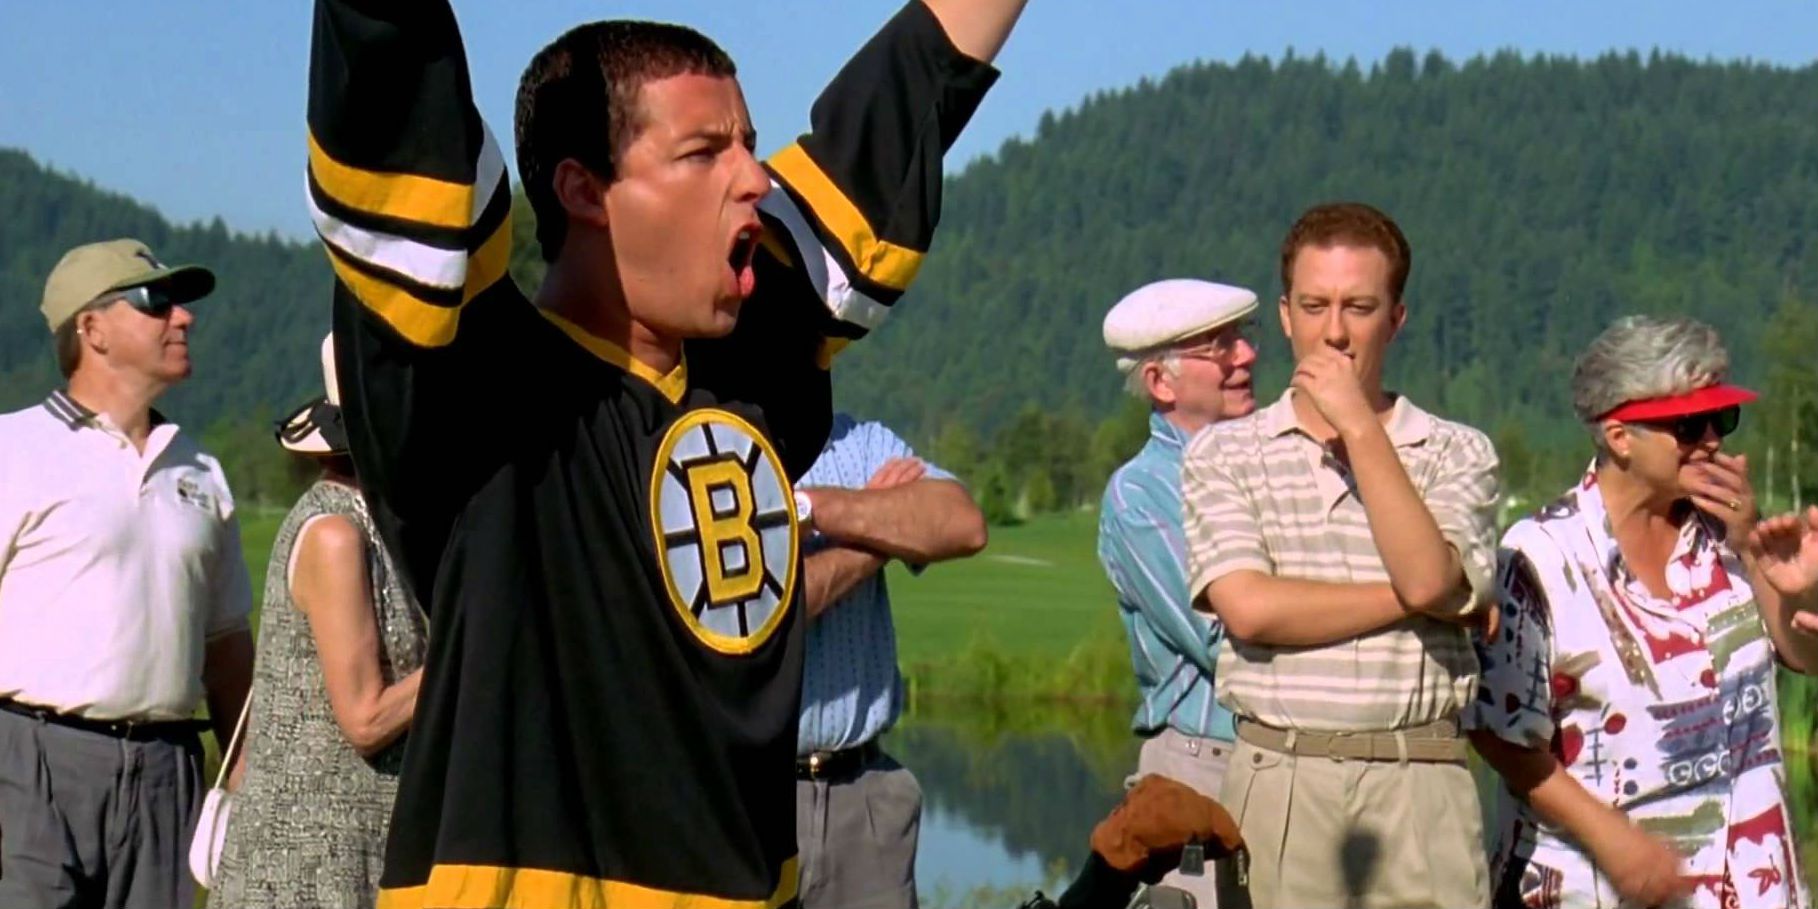 5 Best Sports Movie Climaxes Ever (& 5 Worst)